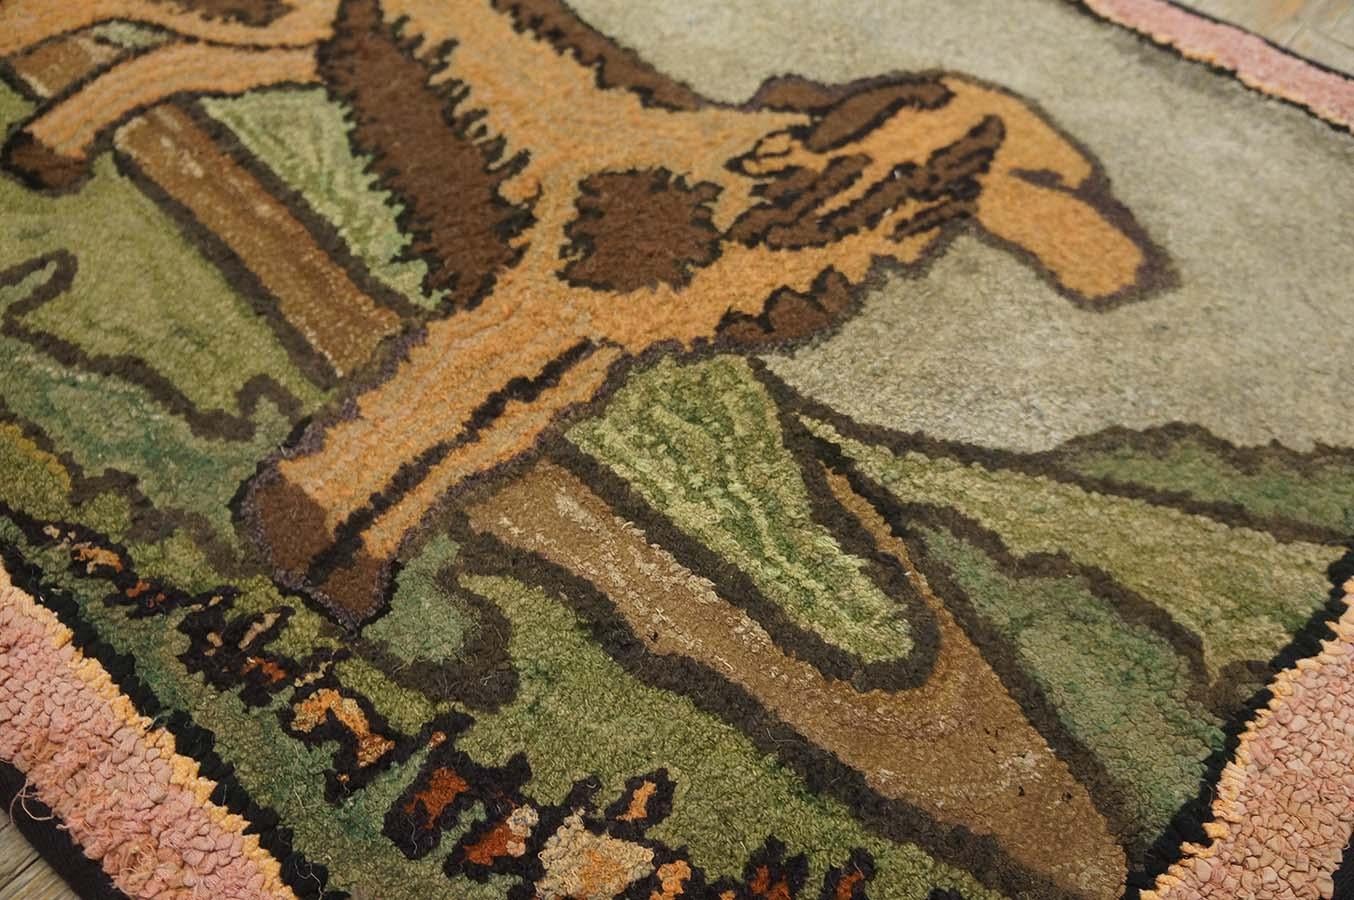 Wool Mid 20th Century Pictorial American Hooked Rug ( 2' 3'' x 3' 3'' - 68 x 99 cm) For Sale